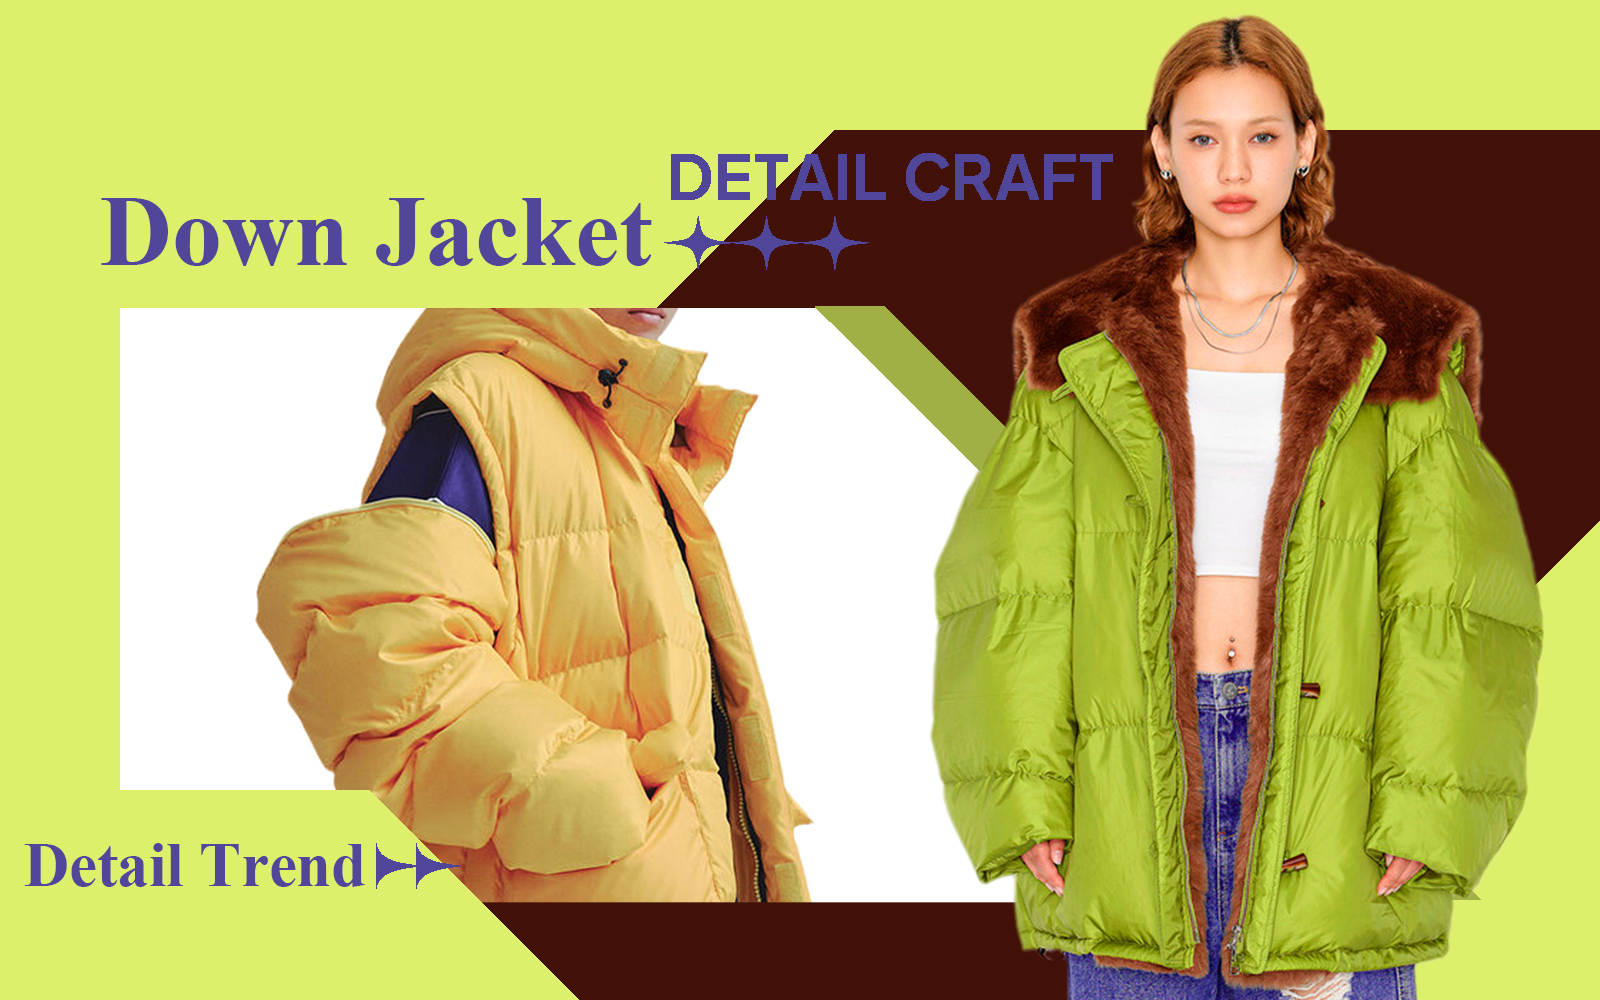 The Detail & Craft Trend for Women's Down Jacket